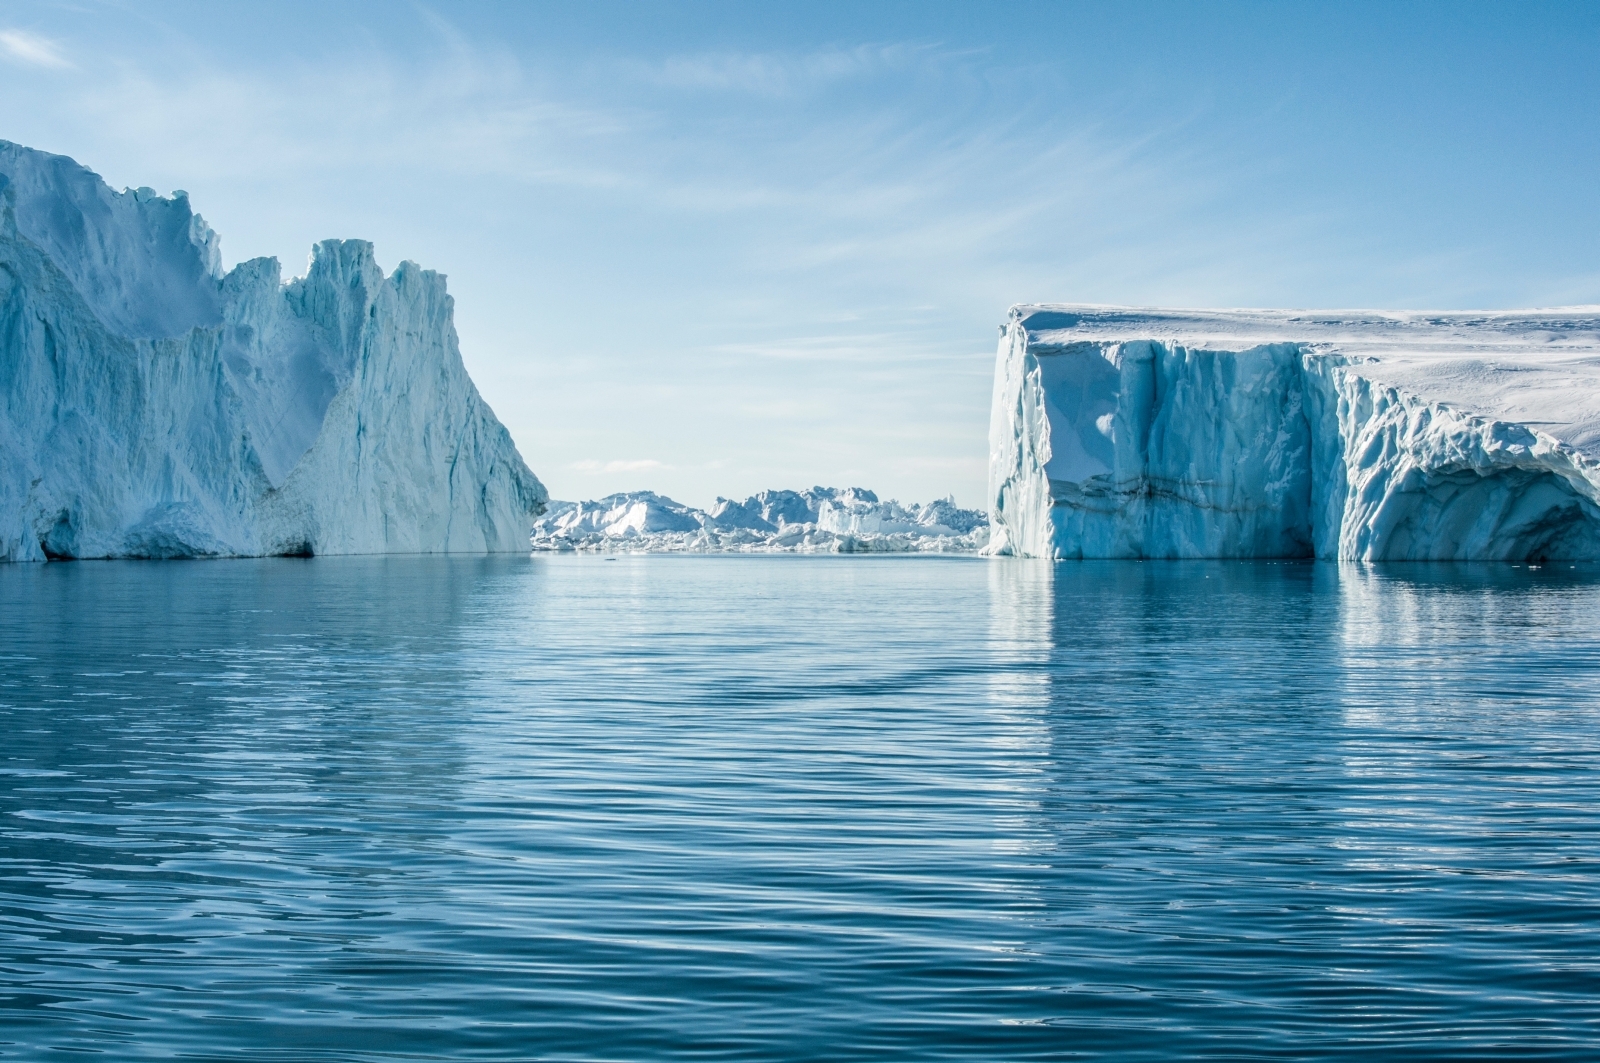 Ilulissat Icefjord in Greenland